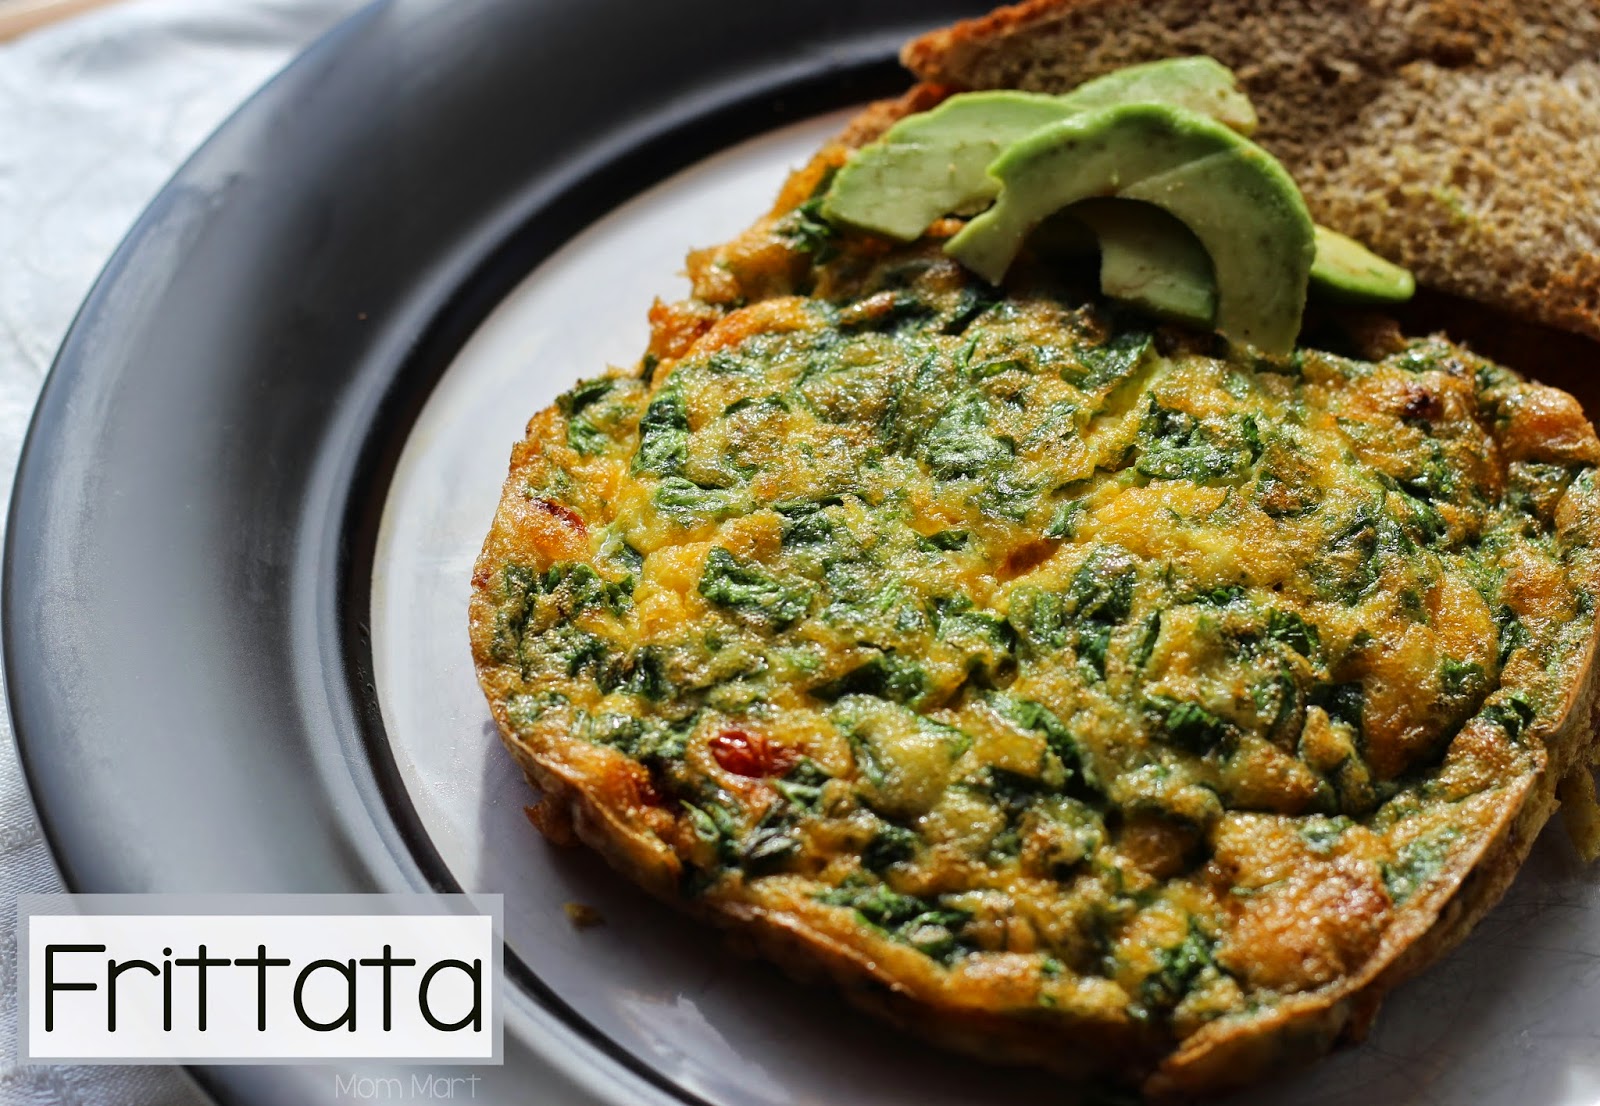 Frittata Recipe: lots of vegetables and breakfast is served in 16 minutes.